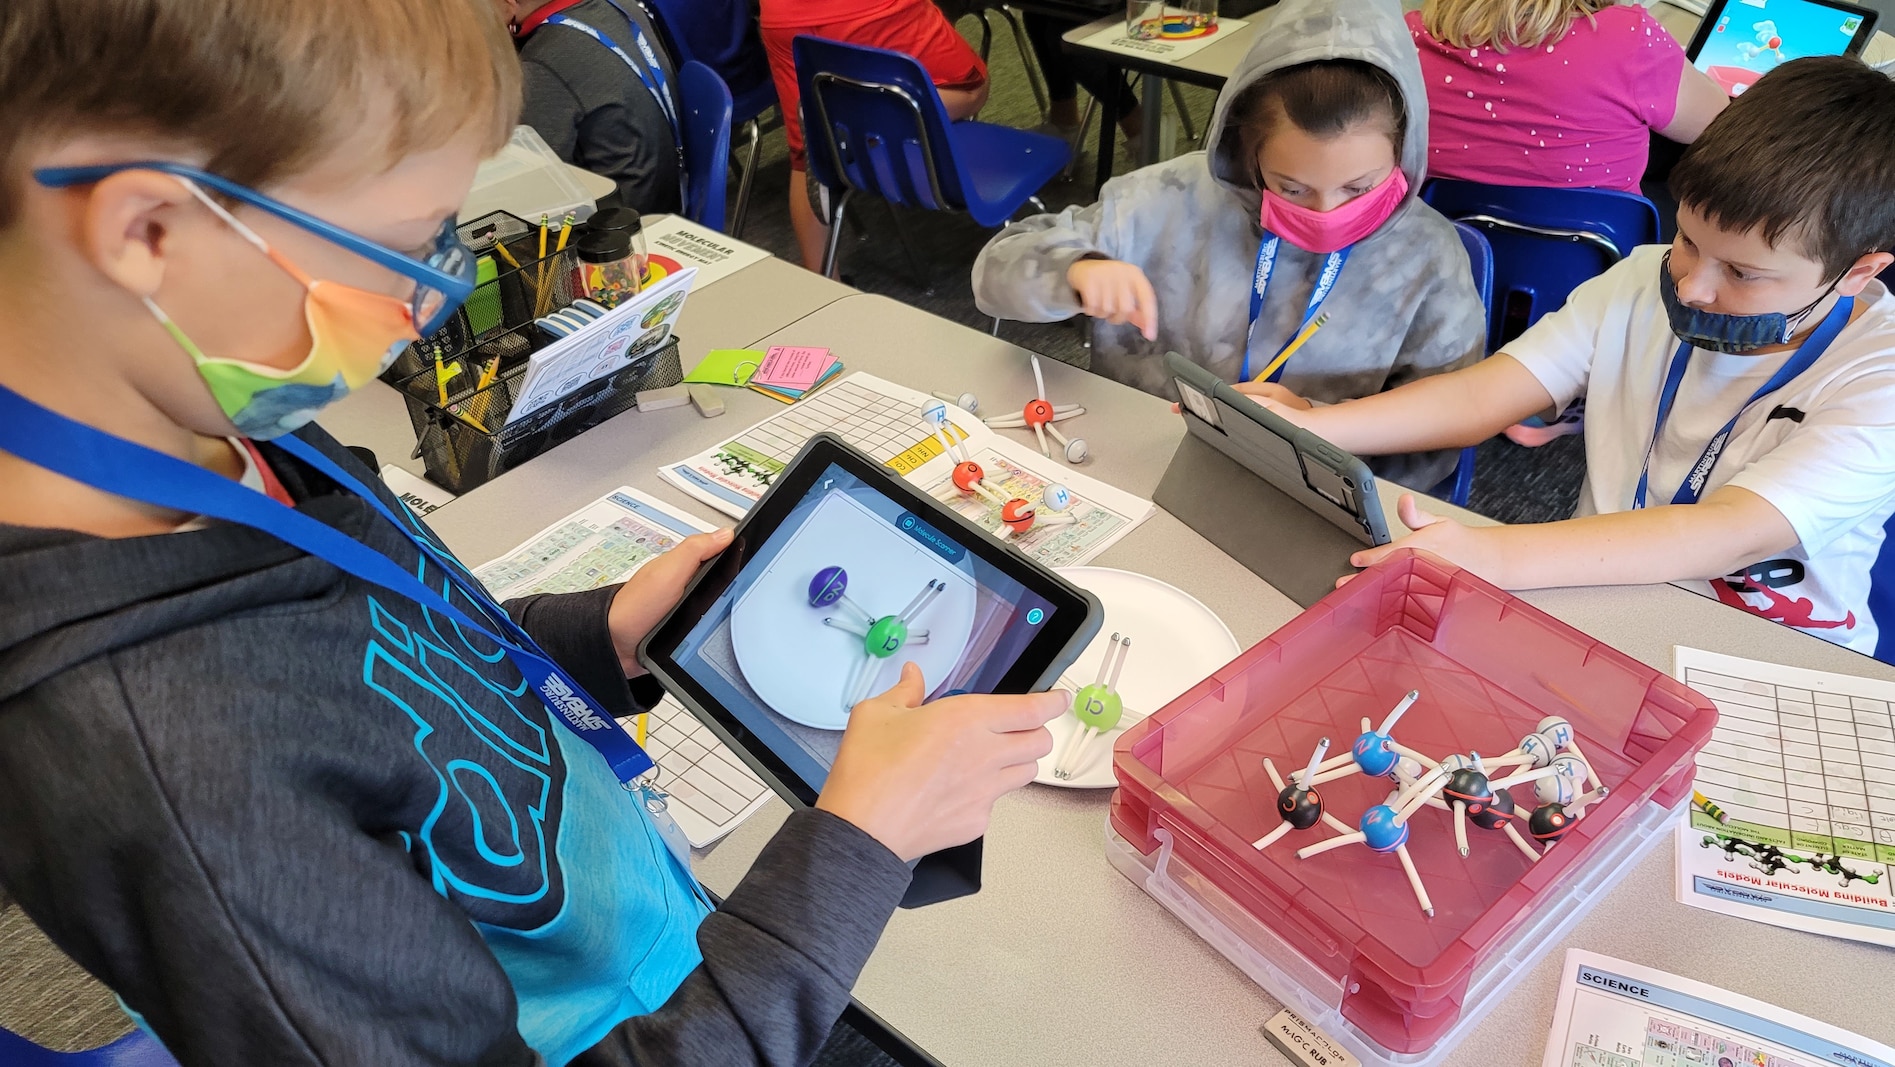 STARBASE Martinsburg offers students "hands-on, minds-on" STEM-based activities.